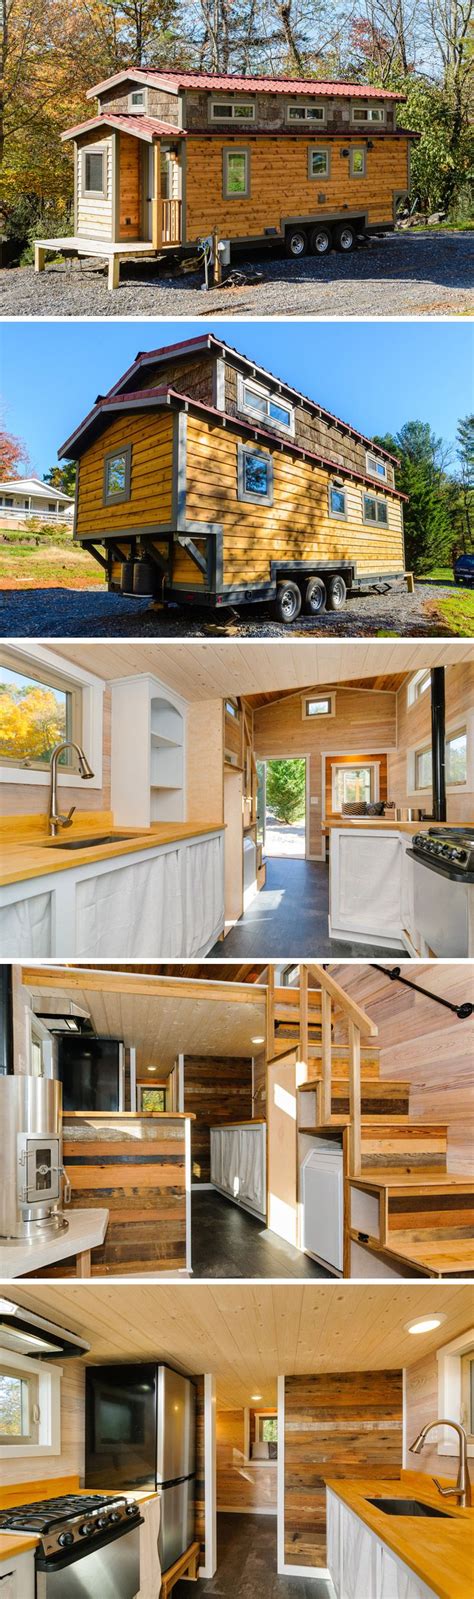 Tiny House With An Eye Catching Exterior Consisting Of Cedar And Poplar